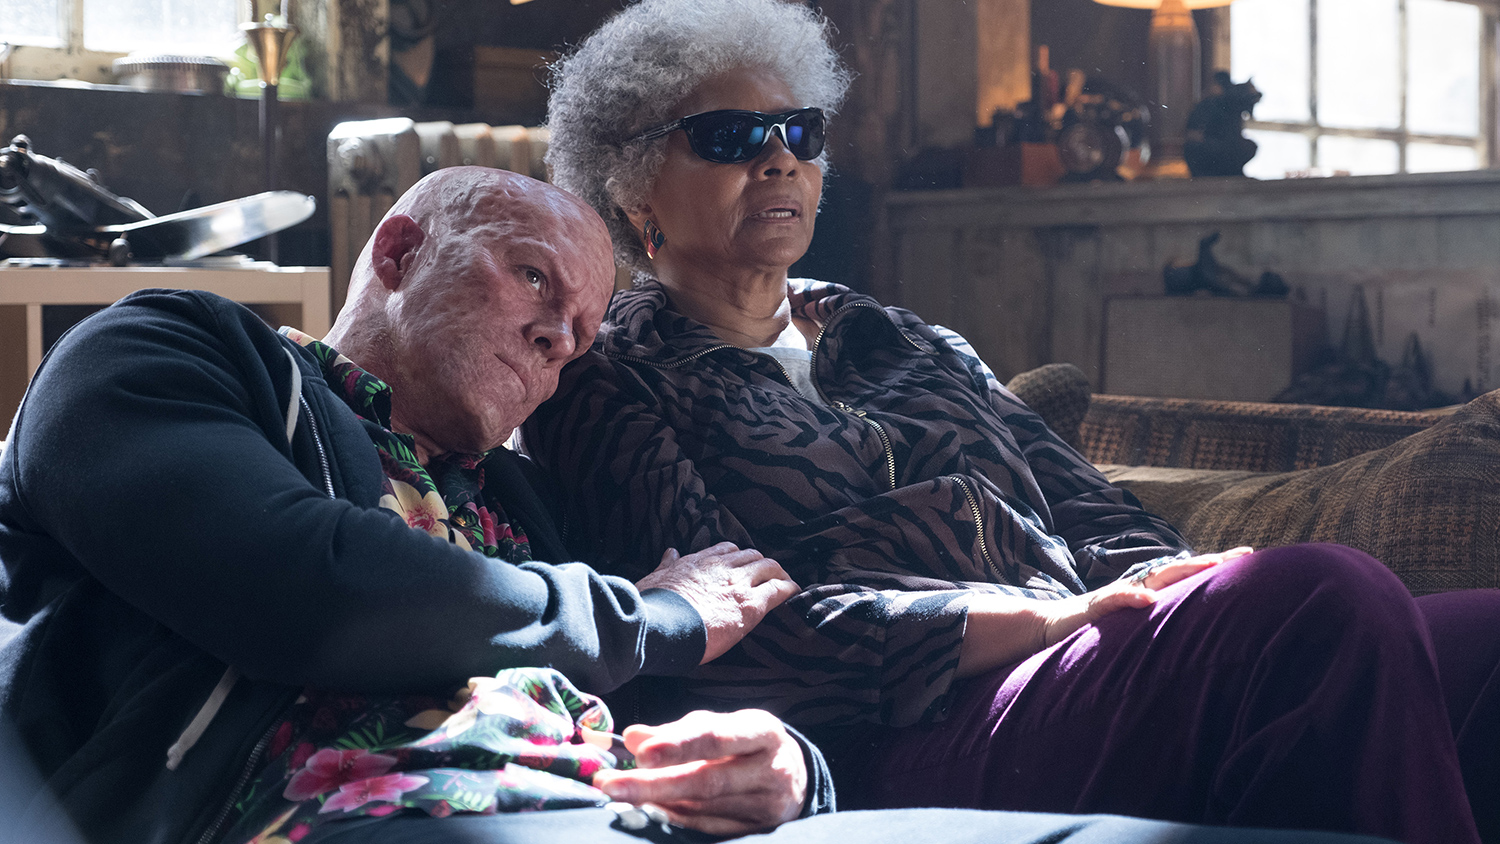 Ryan Reynolds and Leslie Uggams as Deadpool and Blind Al sitting on a couch with Deadpool leaning his head on Al's shoulder in Deadpool 2.